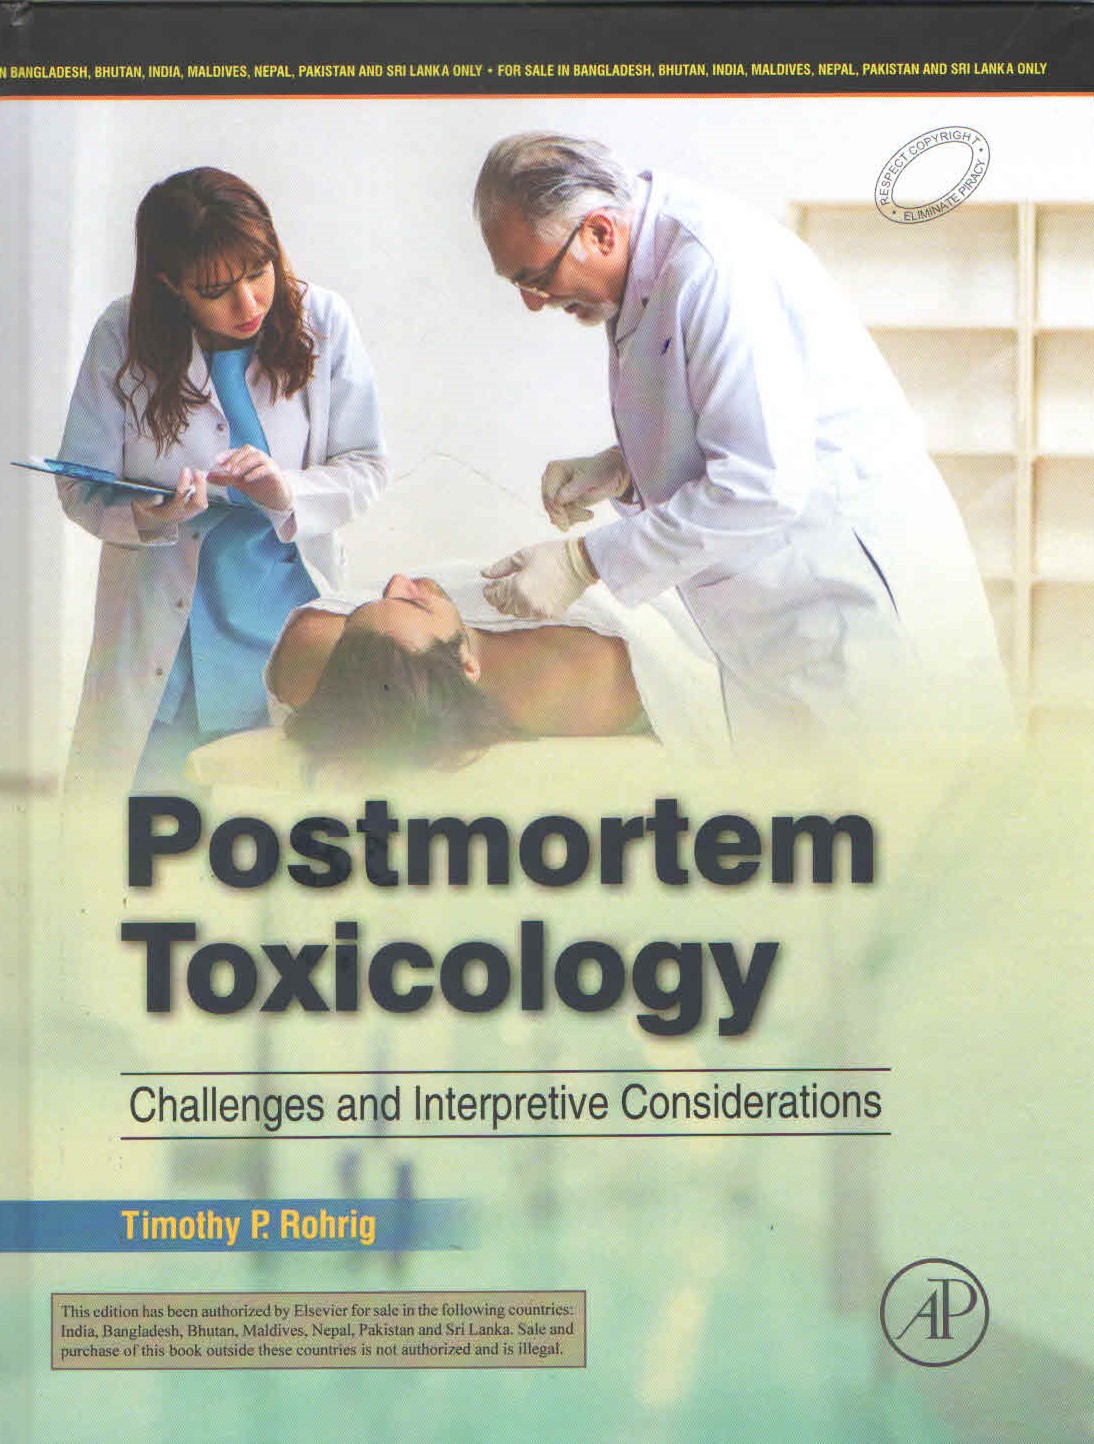 exclusive-publishers/elsevier/postmortem-toxicology:-challenges-and-interpretive-considerations-9788131269596